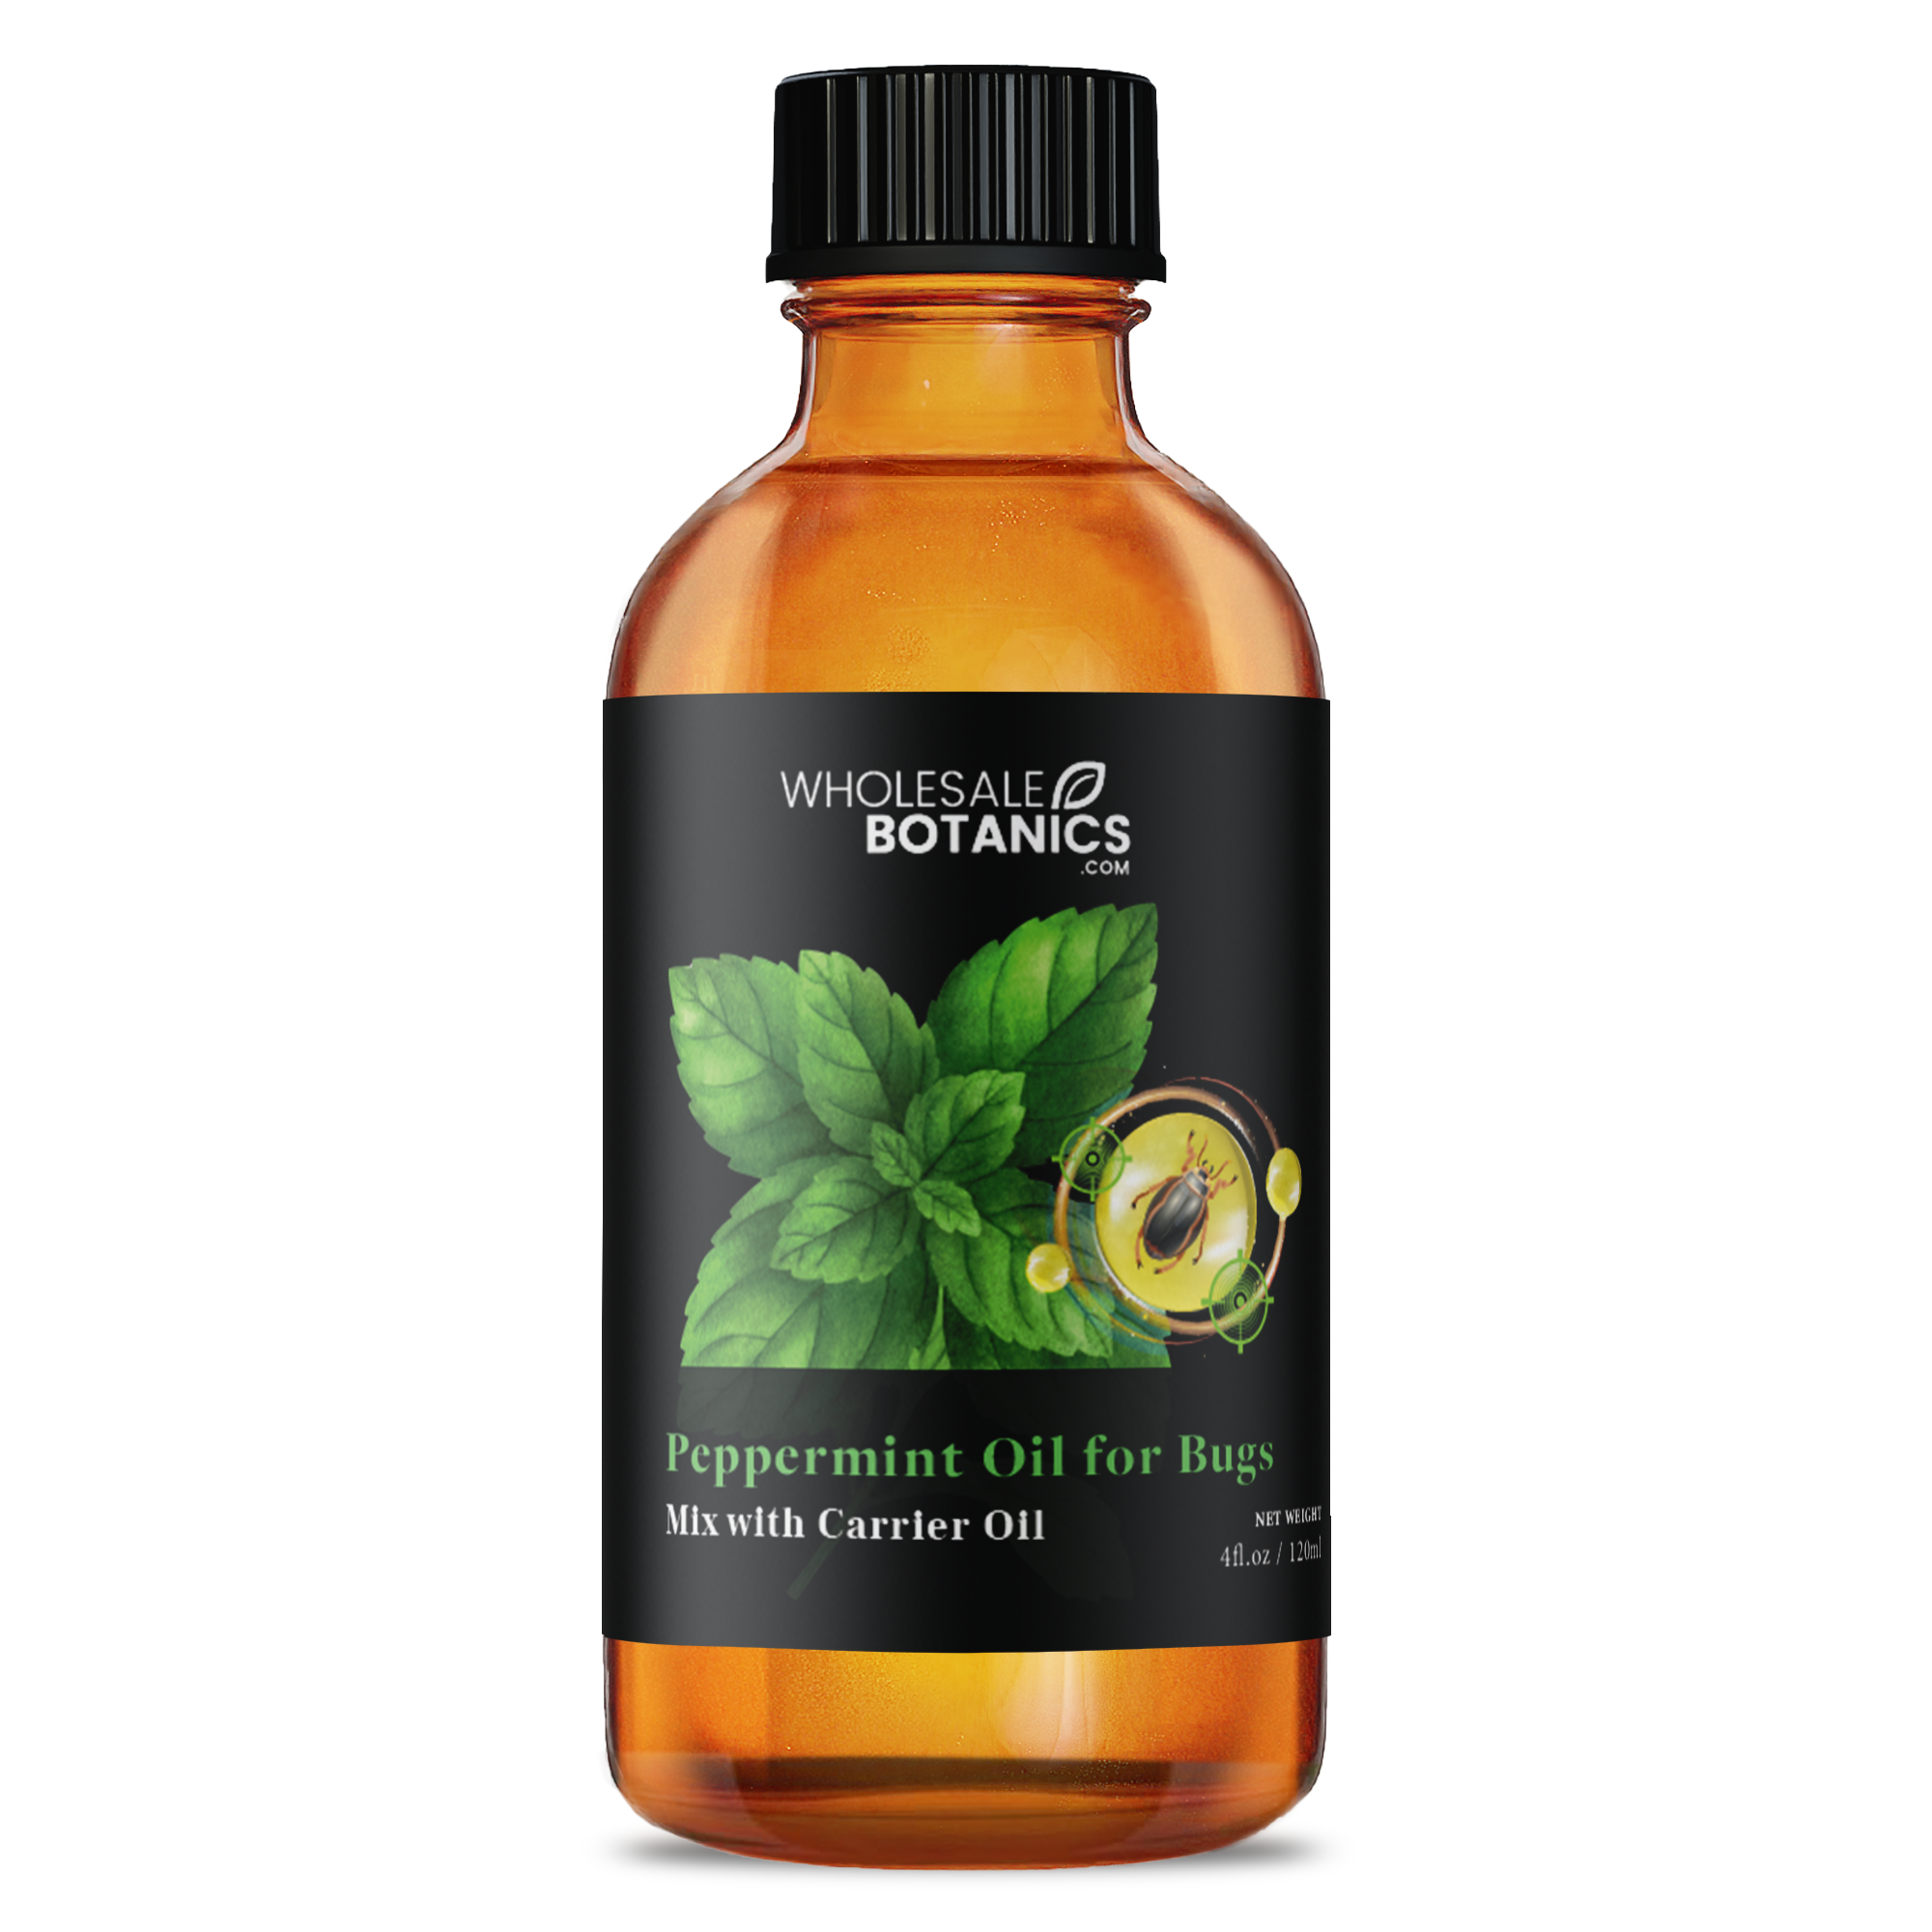 Peppermint Oil for Bugs